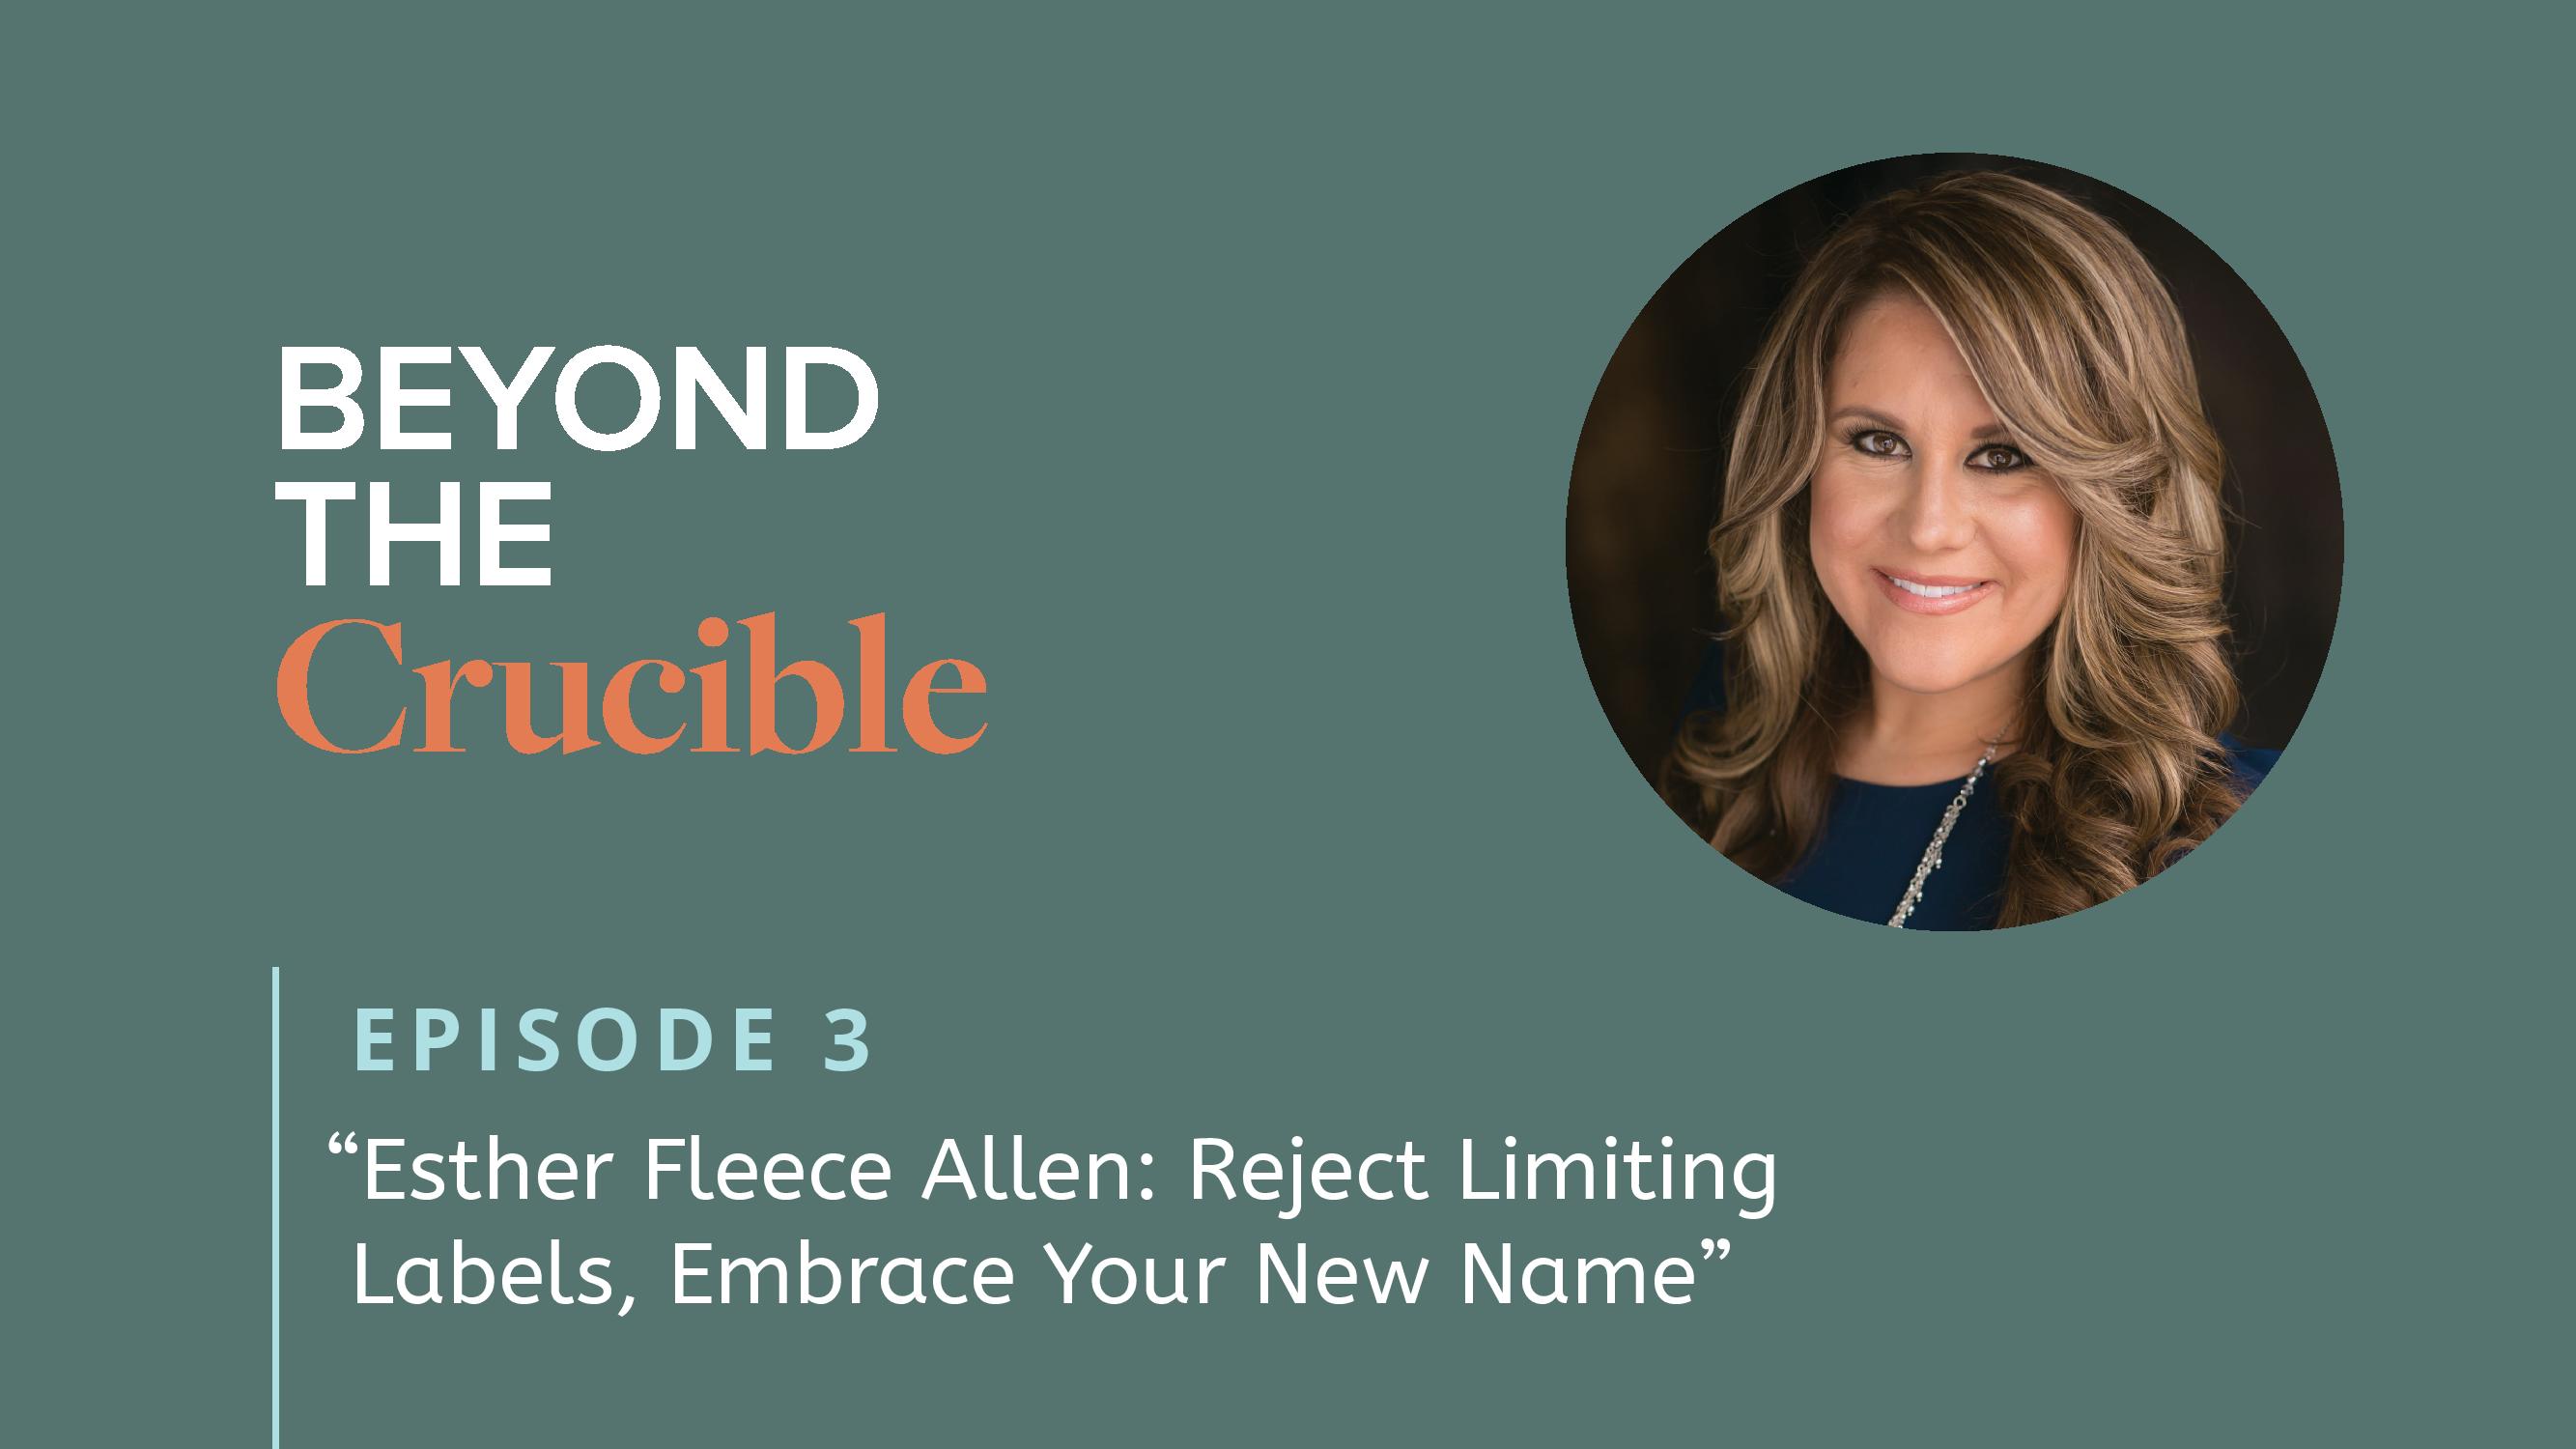 Esther Fleece Allen: Rejecting Limiting Labels, Embrace Your New Name